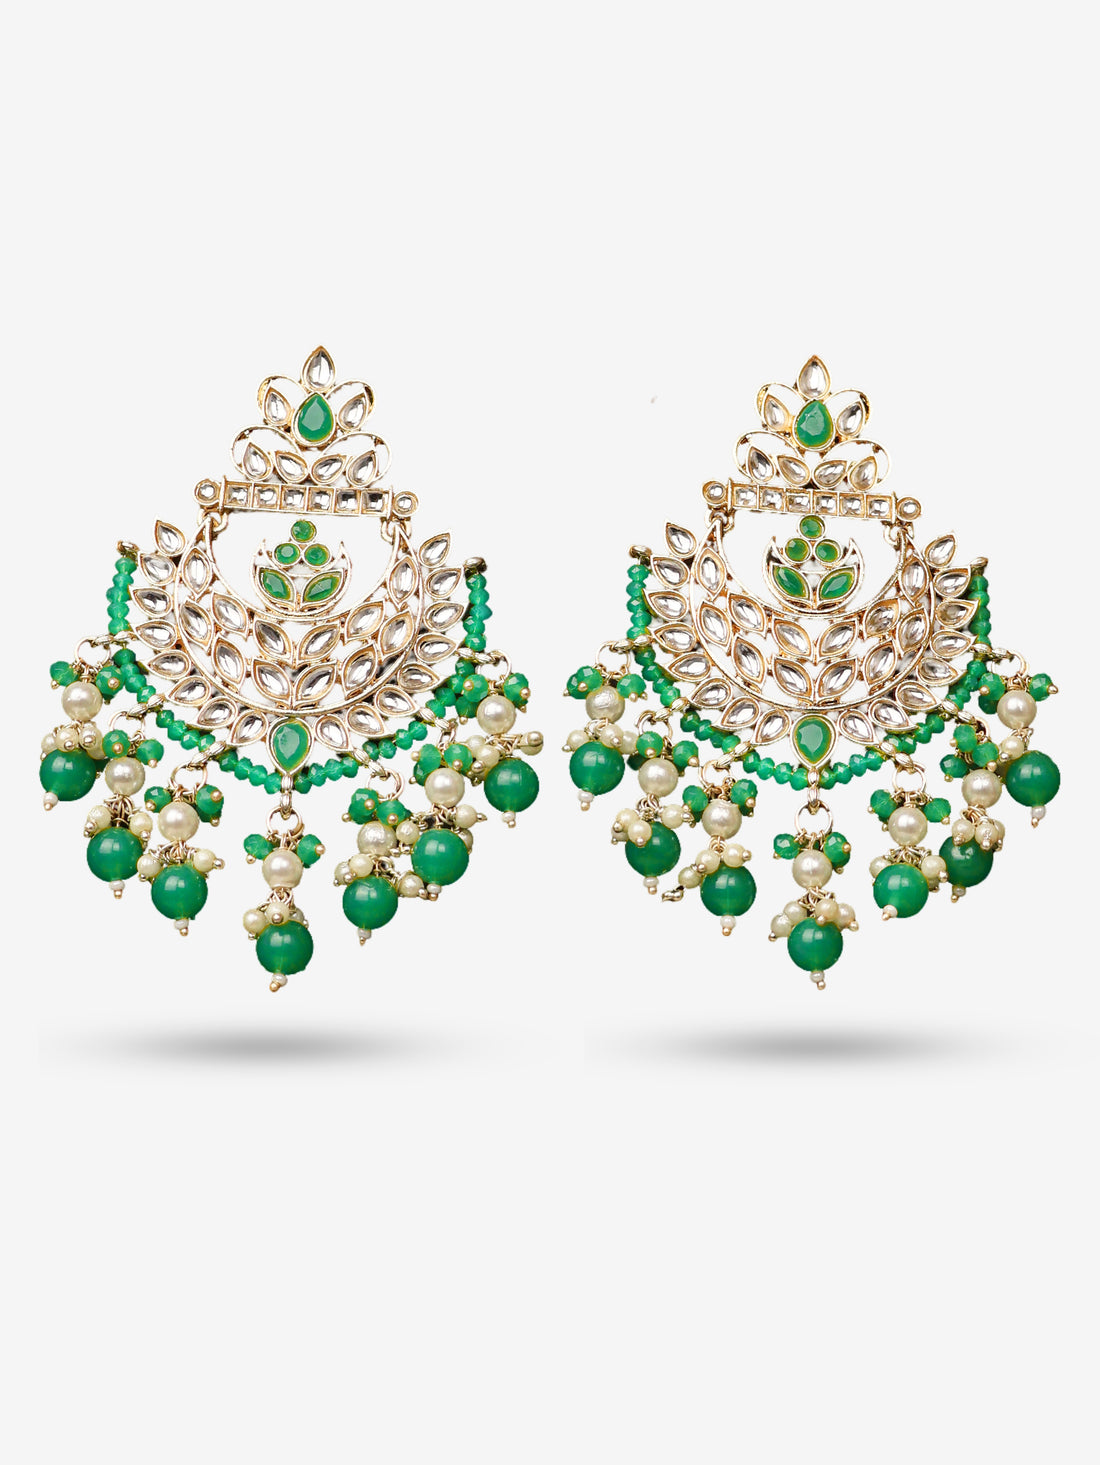 Kundan &amp; Pearl Drop Earrings with Textured Detailing for Women by Shreekama Green Fashion Jewelry for Party Festival Wedding Occasion in Noida